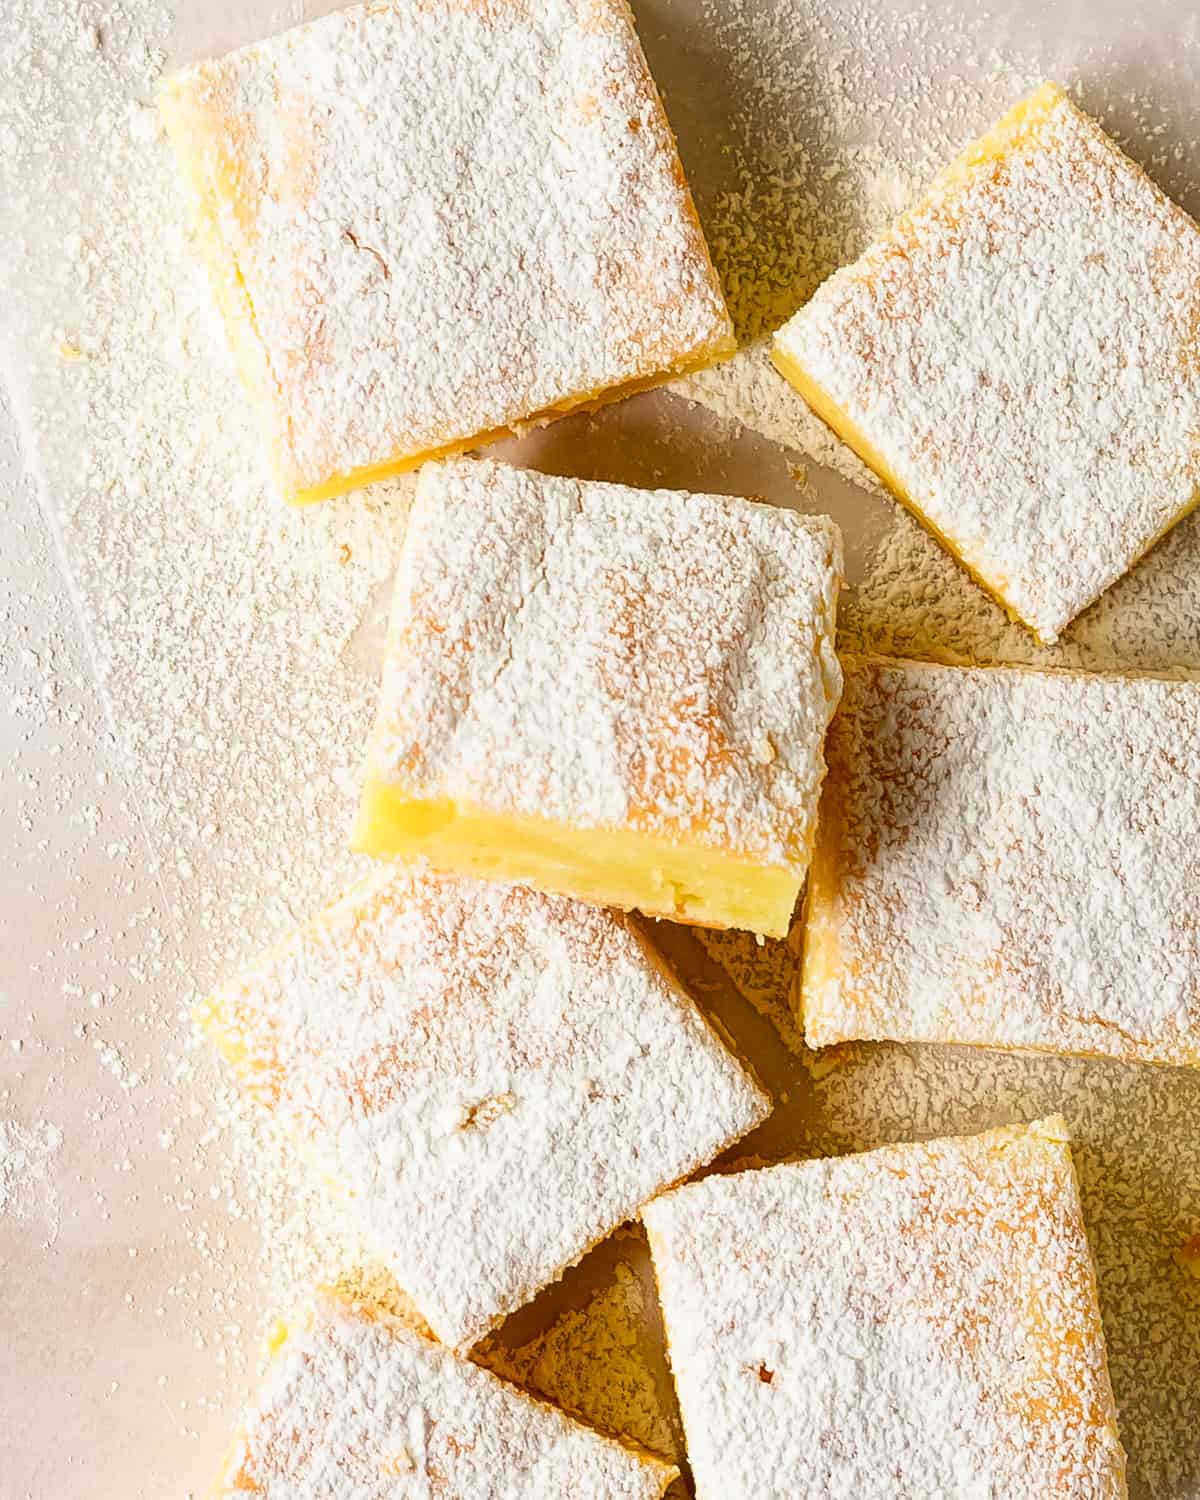 2 ingredient lemon bars are an impossibly quick and easy to make lemon dessert made from light and airy angel food cake mix and tart lemon pie filling. Top these lemon bars from cake mix with a dusting of sweet powdered sugar for a wonderfully refreshing dessert that’s made for spring and summer entertaining.